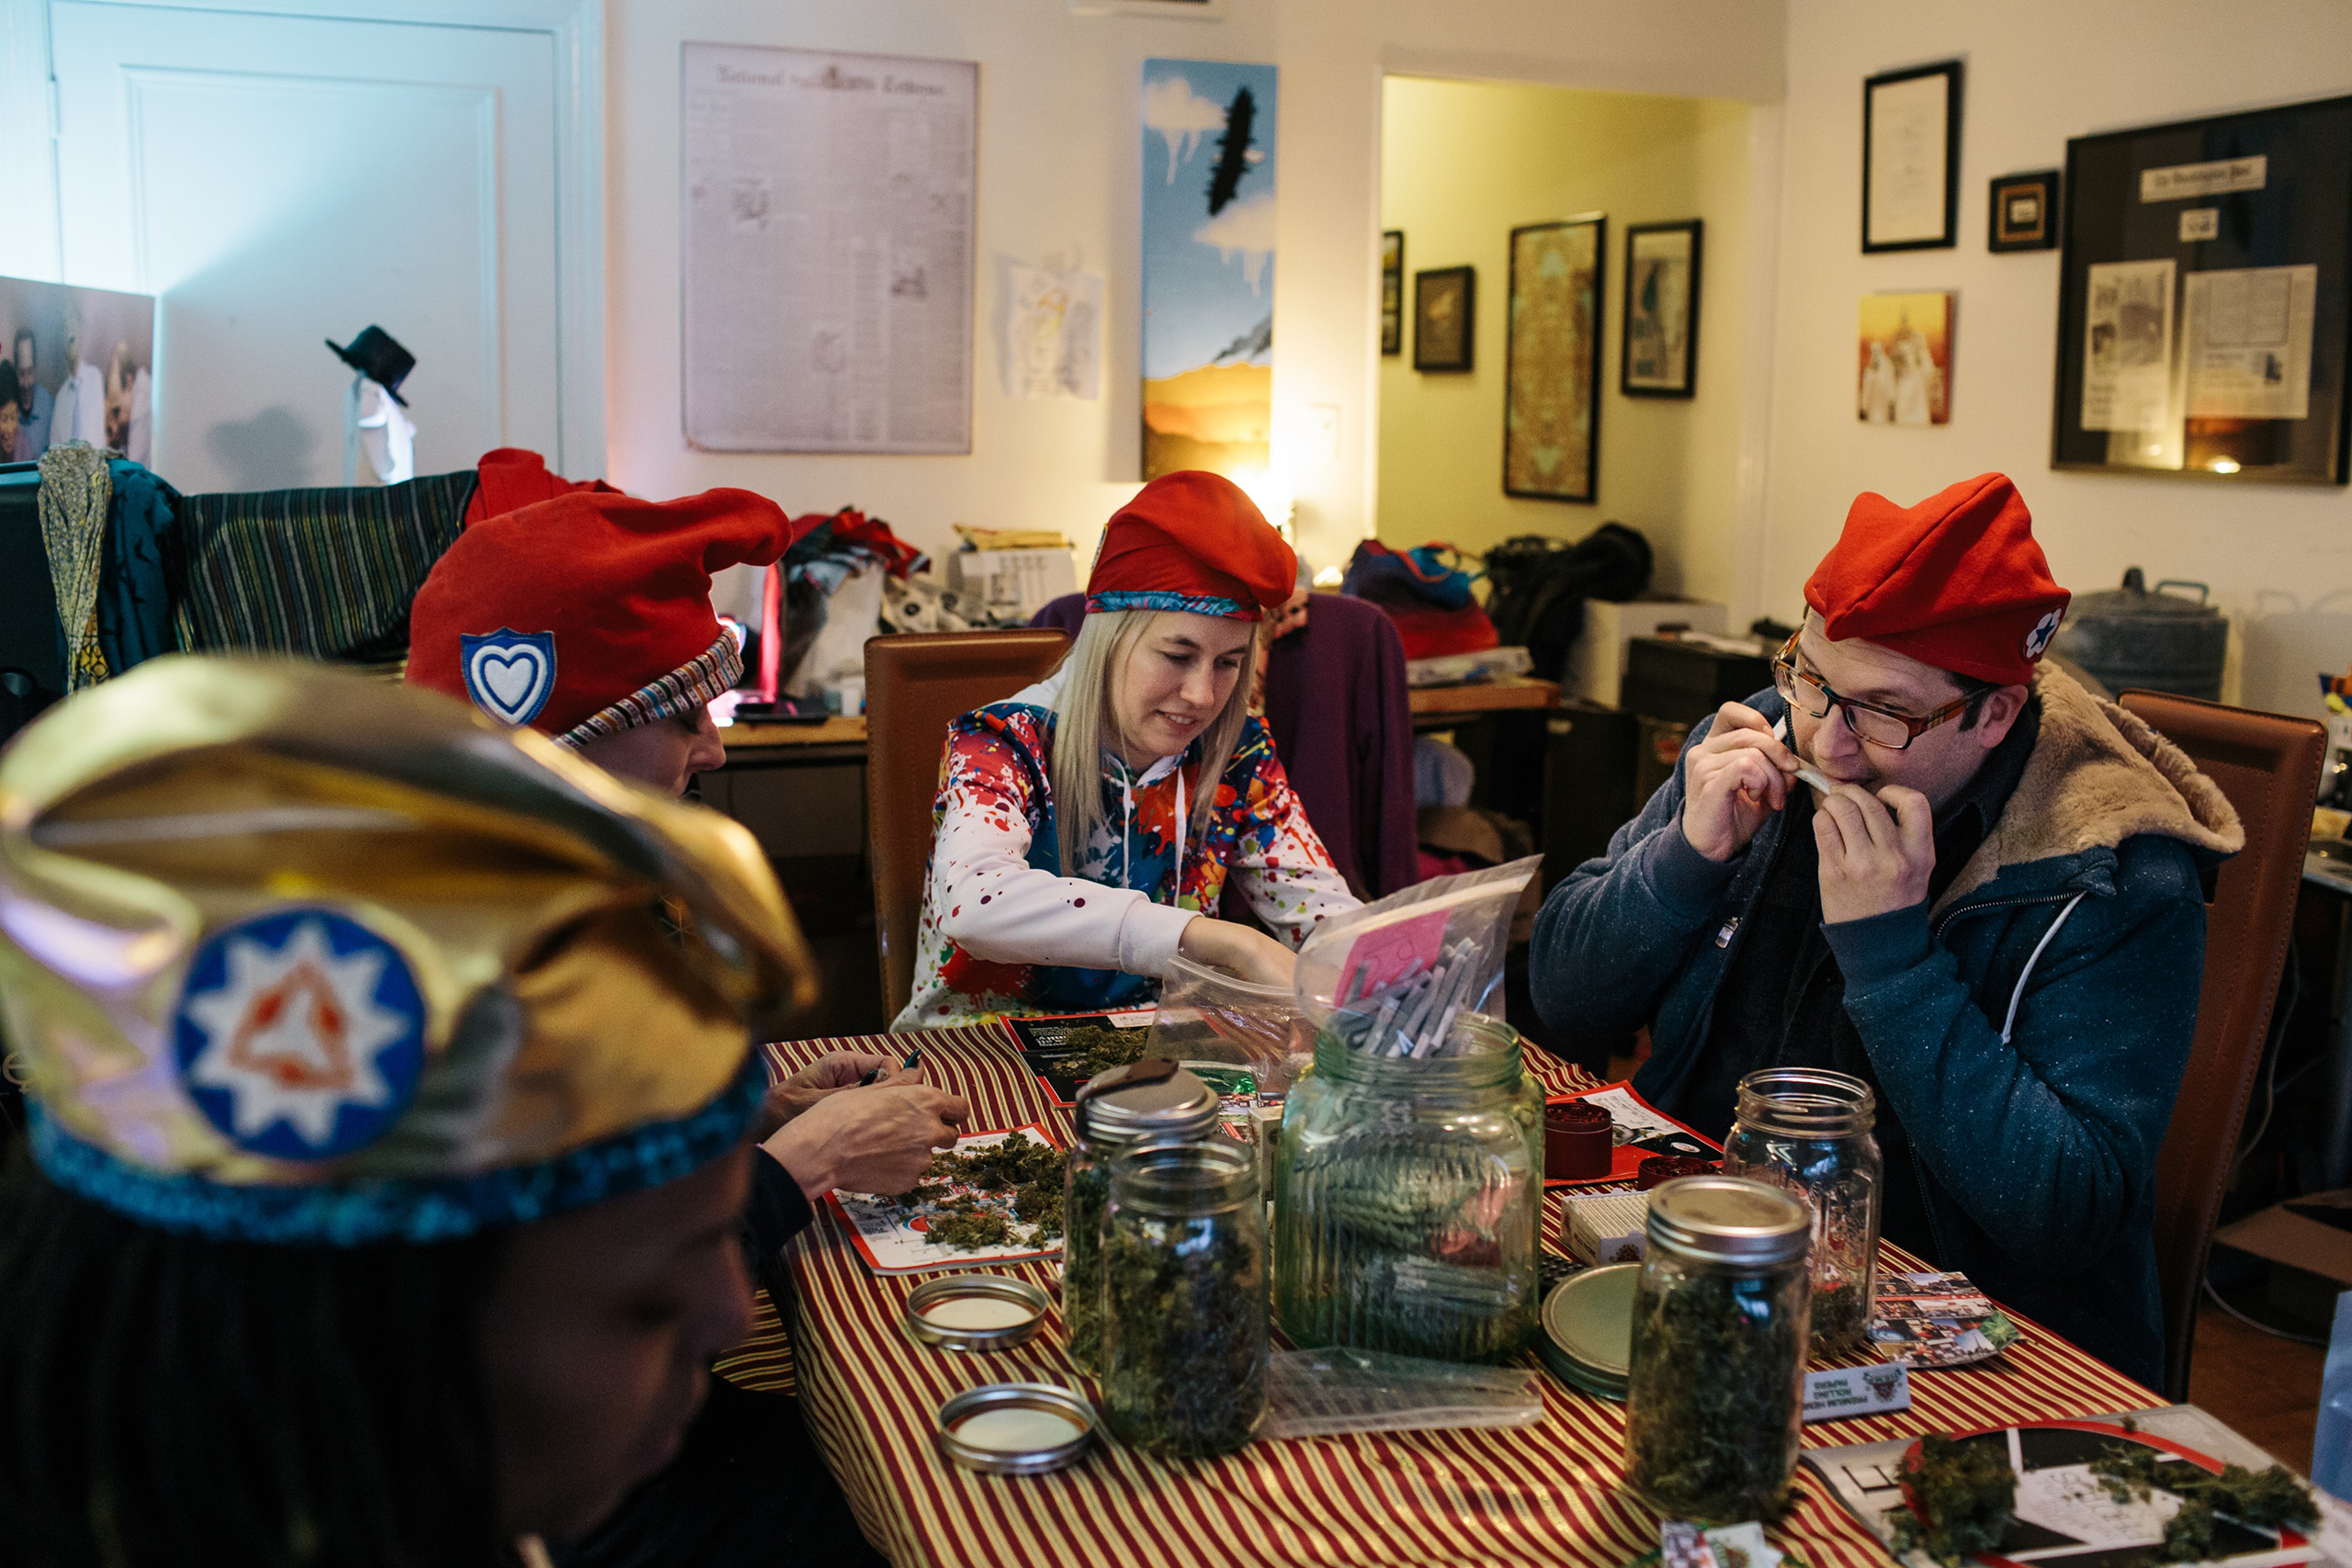 Adam Eidinger, of the cannabis community DCMJ, rolls a joint in a Washington, D.C., home on Jan. 16. The group will distribute thousands of joints before President-Elect Donald Trump's inauguration. (Lexey Swall—GRAIN for TIME)